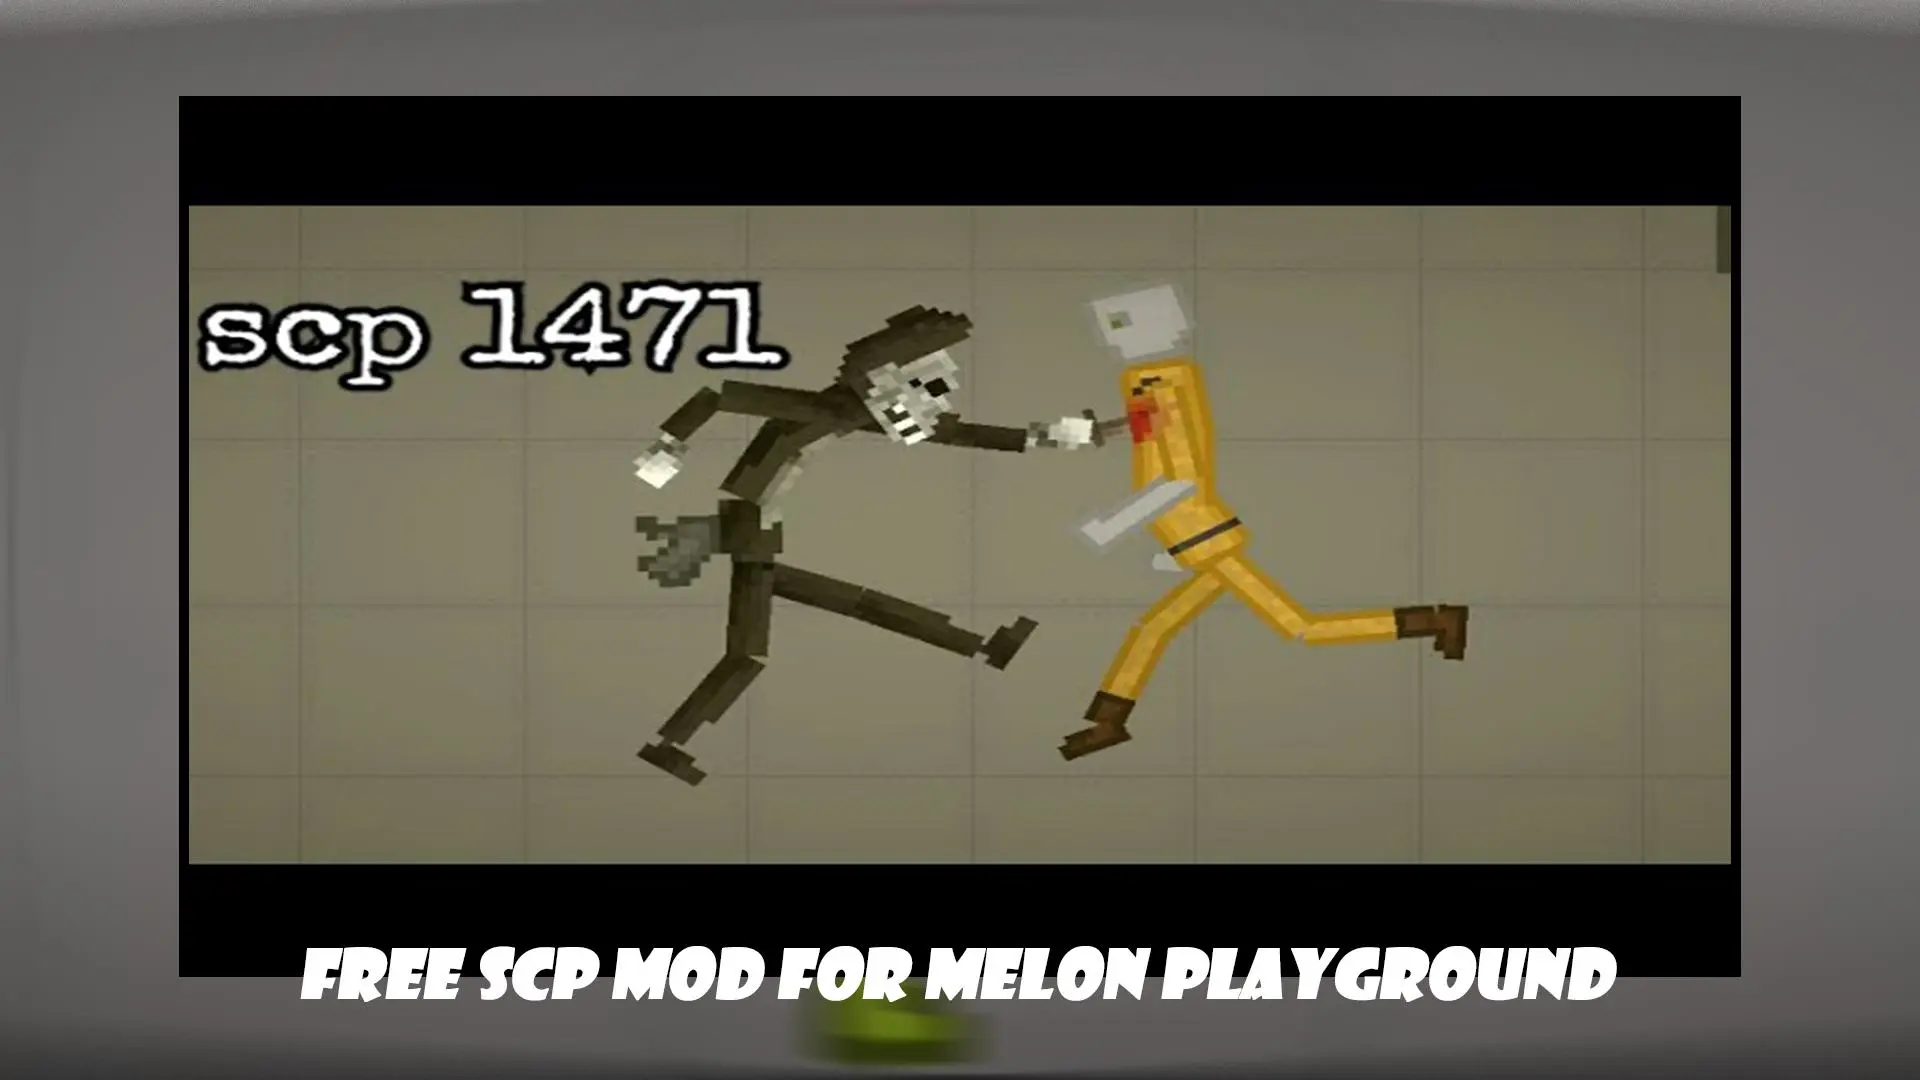 Download Mod SCP for Melon android on PC